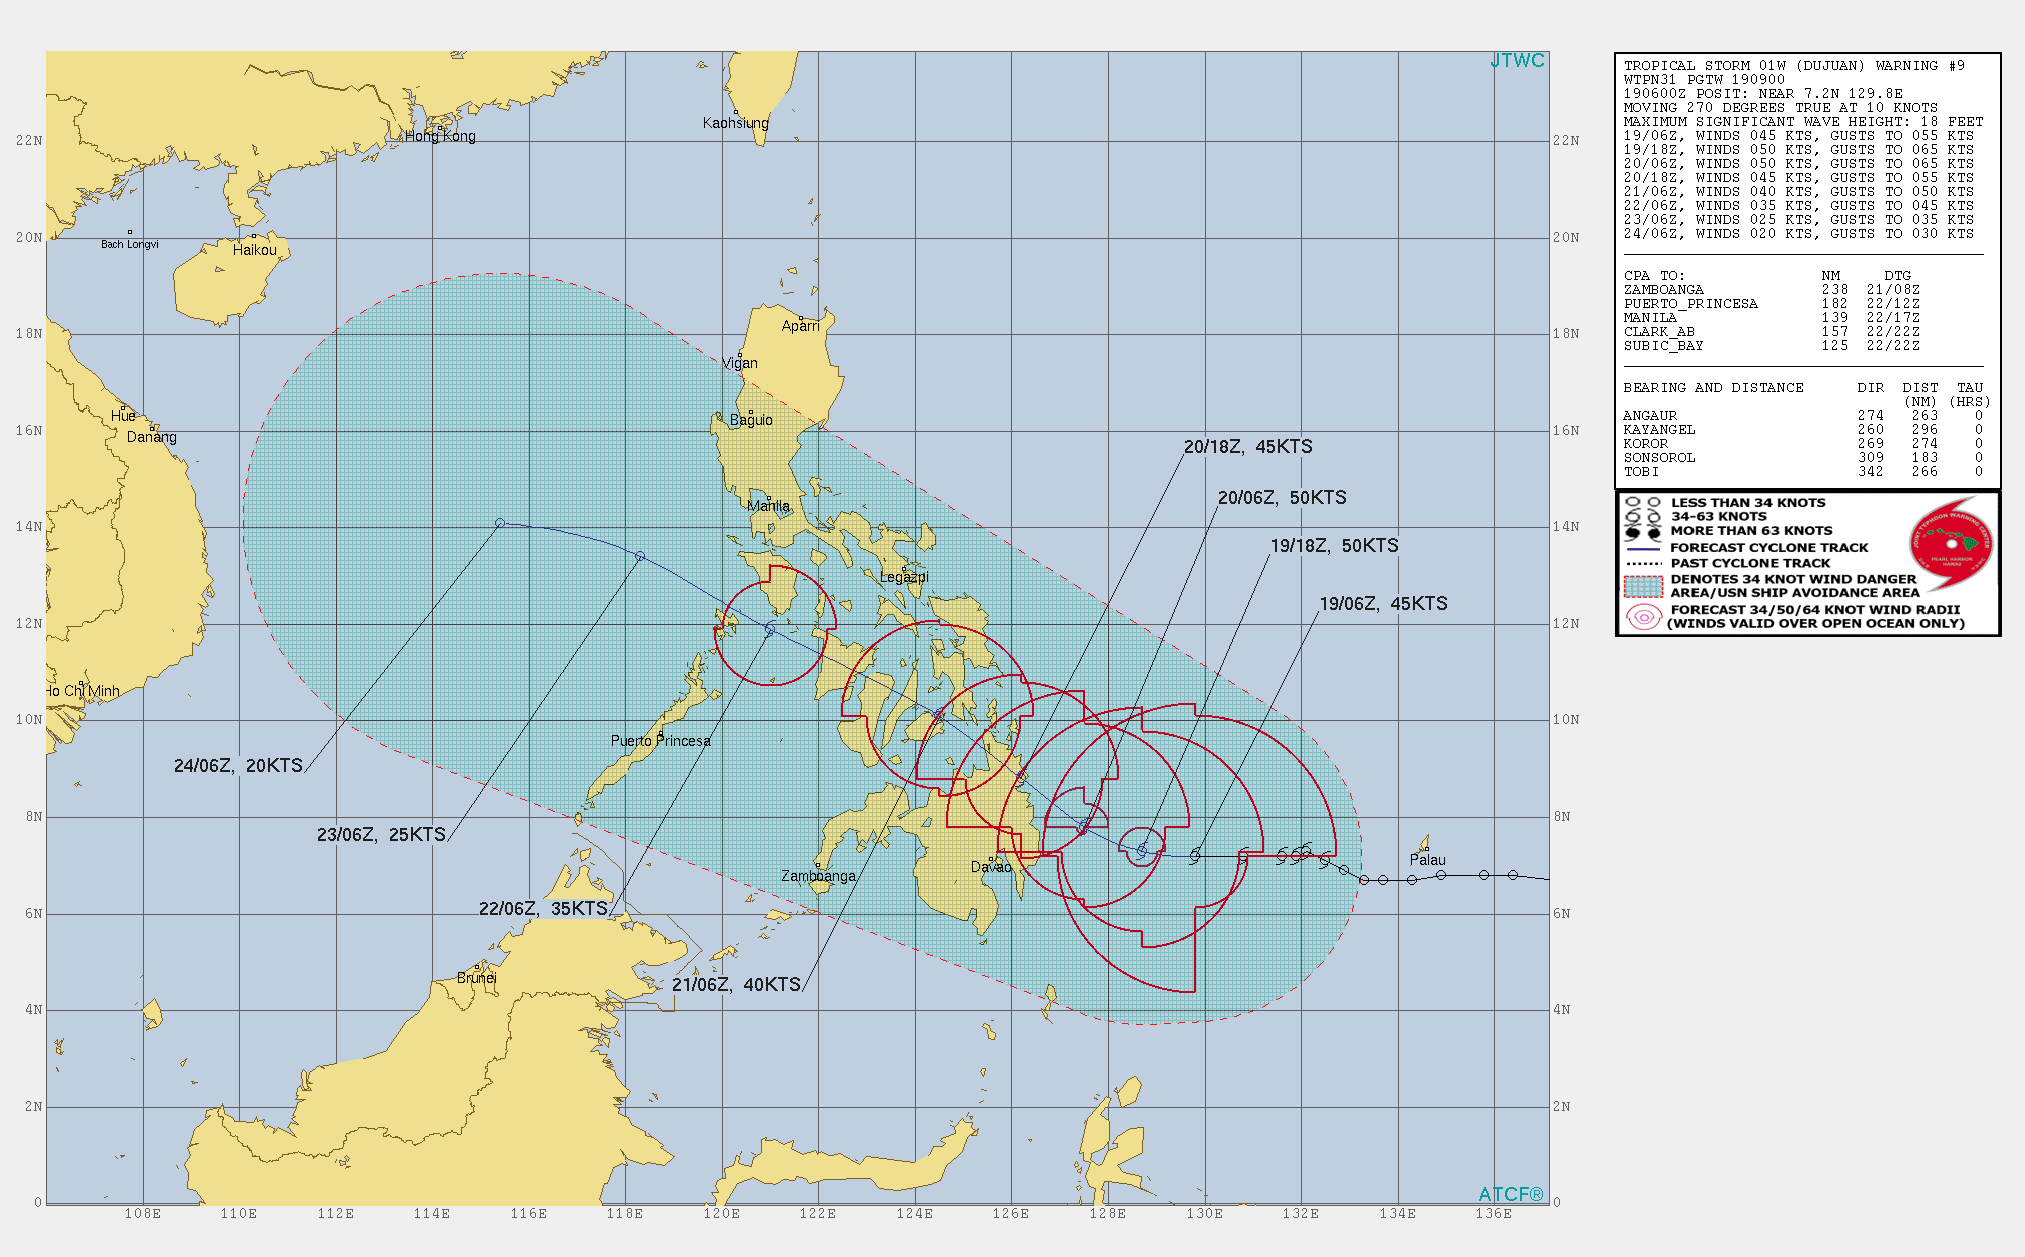 01W(DUJUAN). WARNING 9 ISSUED AT 19/09UTC.ANALYSIS REVEALS NO MAJOR  CHANGE IN THE OVERALL ENVIRONMENT WHICH REMAINS MARGINALLY FAVORABLE  FOR ADDITIONAL DEVELOPMENT, WITH MODERATE (20 KTS) EASTERLY WIND SHEAR BEING OFFSET BY VERY STRONG POLEWARD OUTFLOW. SSTS REMAIN SUPPORTIVE  AT 29-30C. TS 01W IS TRACKING ALONG THE SOUTHWEST PERIPHERY OF A  DEEP-LAYERED SUBTROPICAL RIDGE(STR) POSITIONED TO THE NORTHEAST. TS 01W REMAINS ENSCONCED IN A WEAKNESS IN THE OVERALL STR  PATTERN, HOWEVER IT HAS ACCELERATED WESTWARD OVER THE PREVIOUS 6-12  HOURS AS THE STR CENTERED TO THE EAST HAS EXTENDED AND MOVED  WESTWARD. THE OVERALL TRACK MOTION IS FORECAST TO CONTINUE OVER THE  NEXT 12 HOURS BEFORE TURNING MORE NORTHWESTWARD AS THE STR CONTINUES  TO MOVE TO THE SOUTHWEST AND THE WESTERN PERIPHERY SIMULTANEOUSLY  TAKES ON A MORE NORTHWEST-SOUTHEAST ORIENTATION. TS 01W IS EXPECTED  TO MAKE LANDFALL OVER NORTHEAST MINDANAO NEAR 36H BEFORE TRACKING  OVER THE CENTRAL PHILIPPINE ISLANDS AND INTO THE NORTHERN SULU SEA  BY 72H. DUE TO THE PERSISTENT EASTERLY WIND SHEAR, THE SYSTEM HAS BEEN  UNABLE TO CONSISTENTLY MAINTAIN A CORE, AND THIS TREND IS EXPECTED  TO CONTINUE OVER THE NEXT 24 HOURS OR SO, WITH CONSOLIDATION AND  STRENGTHENING OCCURRING NEAR DIURNAL MAXIMUM, FOLLOWED BY WEAKENING  DUE THE DIURNAL MINIMUM. THE NET TREND WILL BE A SMALL AMOUNT OF  INTENSIFICATION TO A PEAK OF 50 KNOTS BY 12H, THEN STEADY WEAKENING  THROUGH 72H AS WIND SHEAR INCREASES AND THE SYSTEM INTERACTS WITH THE  COMPLEX TERRAIN OF THE PHILIPPINE ISLANDS. AFTER 72H, TS 01W WILL CONTINUE TO TRACK WEST-NORTHWESTWARD  ALONG THE WESTERN PERIPHERY OF THE AFOREMENTIONED STR CENTERED TO  THE EAST, AND EMERGE INTO THE SOUTH CHINA SEA PRIOR TO 96H.  THE STEERING PATTERN WEAKENS AFTER 96H, WHICH WILL RESULT IN A SLOWER  FORWARD MOTION THROUGH 120H. ONCE IN THE SOUTH CHINA SEA THE SYSTEM WILL  ENCOUNTER A DRIER AND COOLER AIR MASS, WHICH COMBINED WITH CONTINUED  MODERATE TO HIGH WIND SHEAR AND DECREASED OUTFLOW ALOFT, WILL LEAD TO  DISSIPATION OVER THE CENTRALSOUTH CHINA SEA BY 120H.